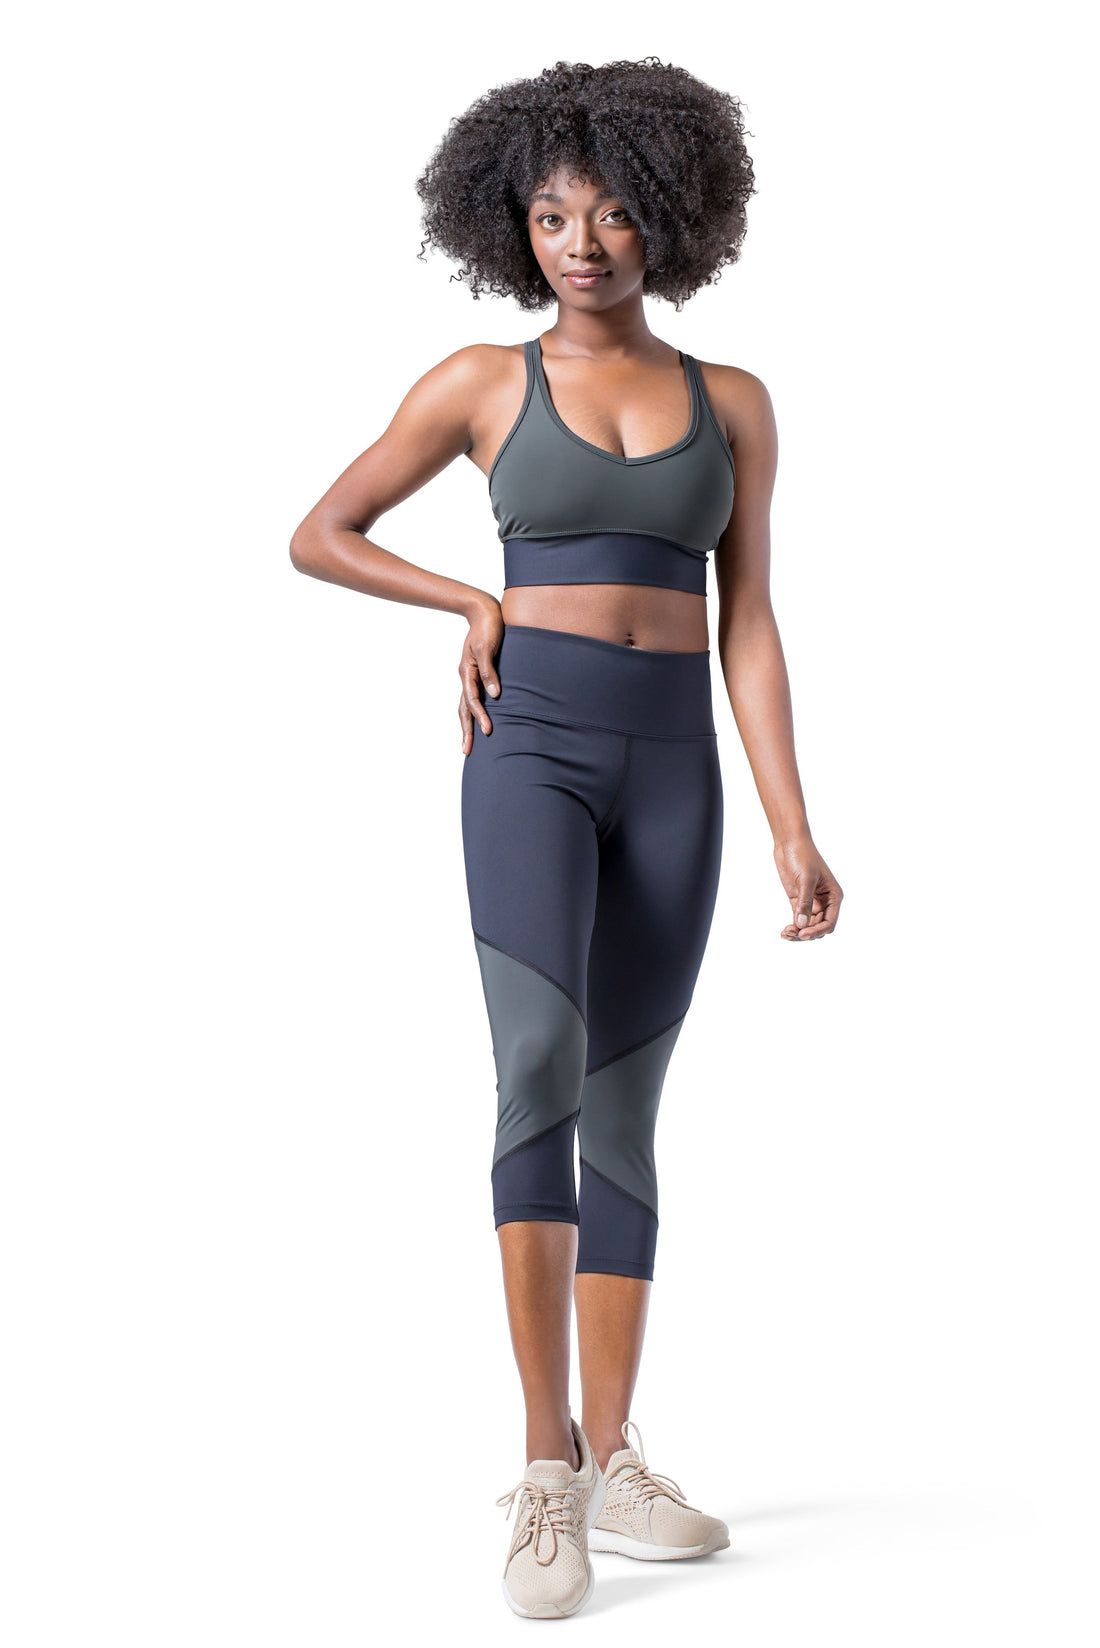 Got Your Back Tech Shrug – Perspective Fitwear